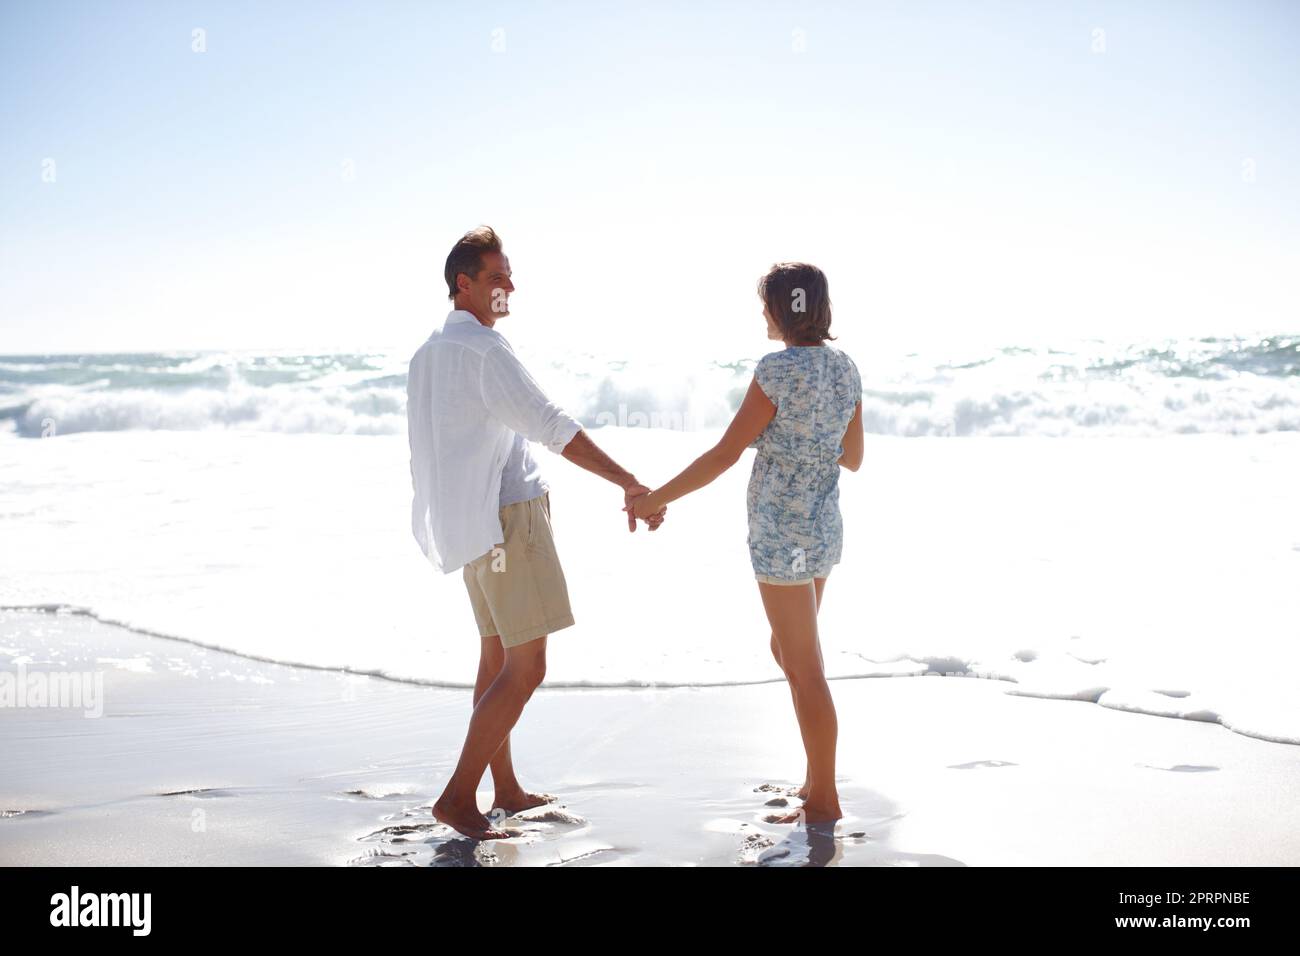 Enjoying the romance of the ocean. Rearview of a happy mature couple walking hand in hand on the beach. Stock Photo